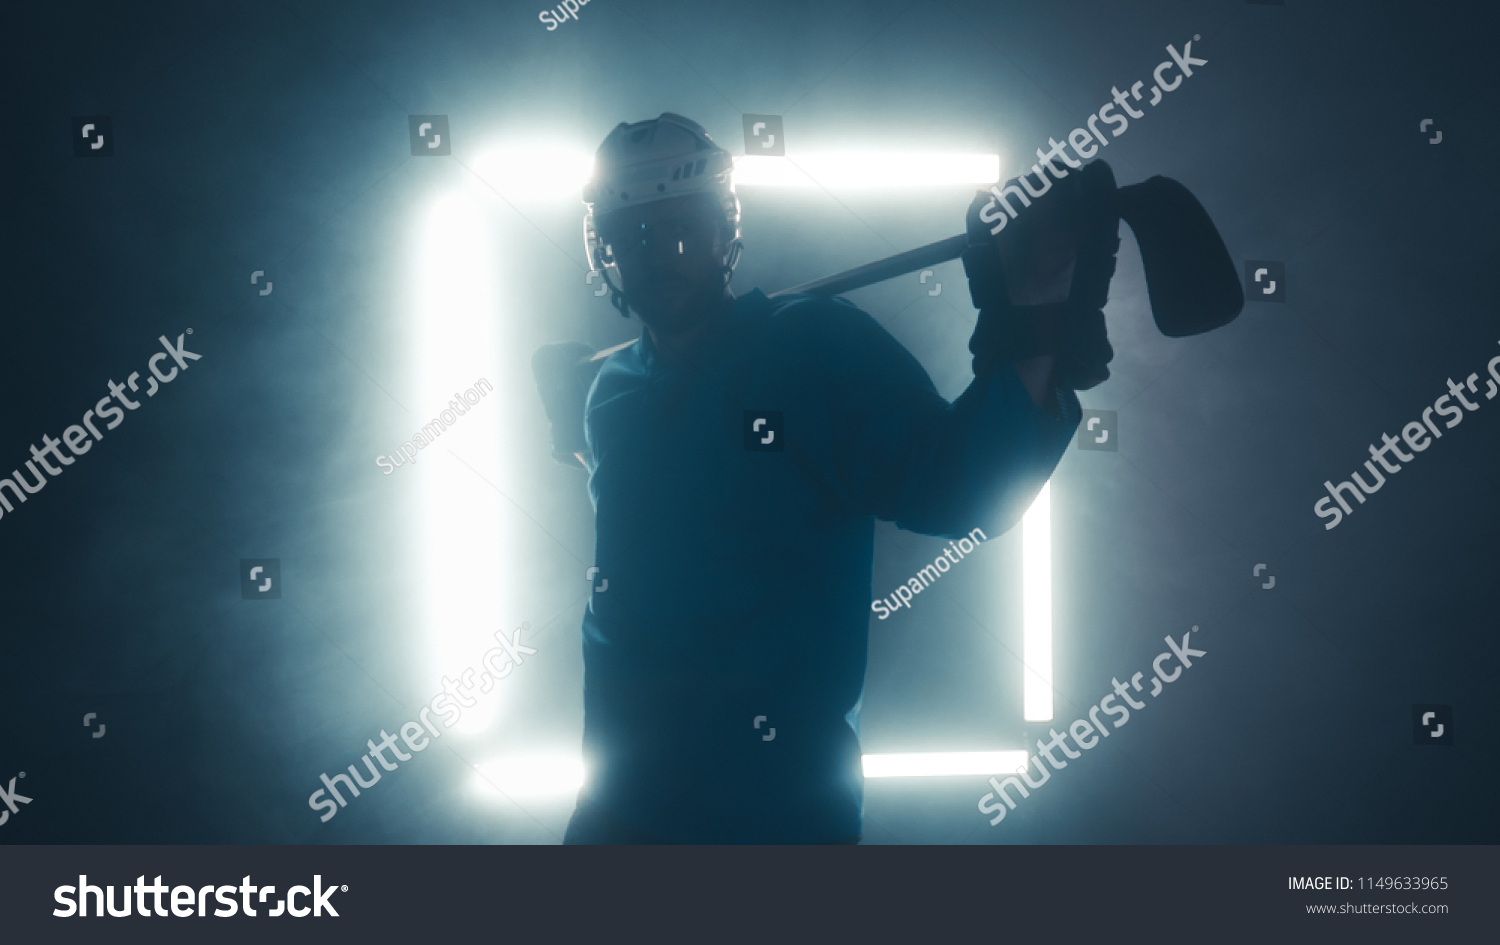 Portrait of Caucasian male ice hockey player in uniform, looking into the camera, dramatic lighting #1149633965